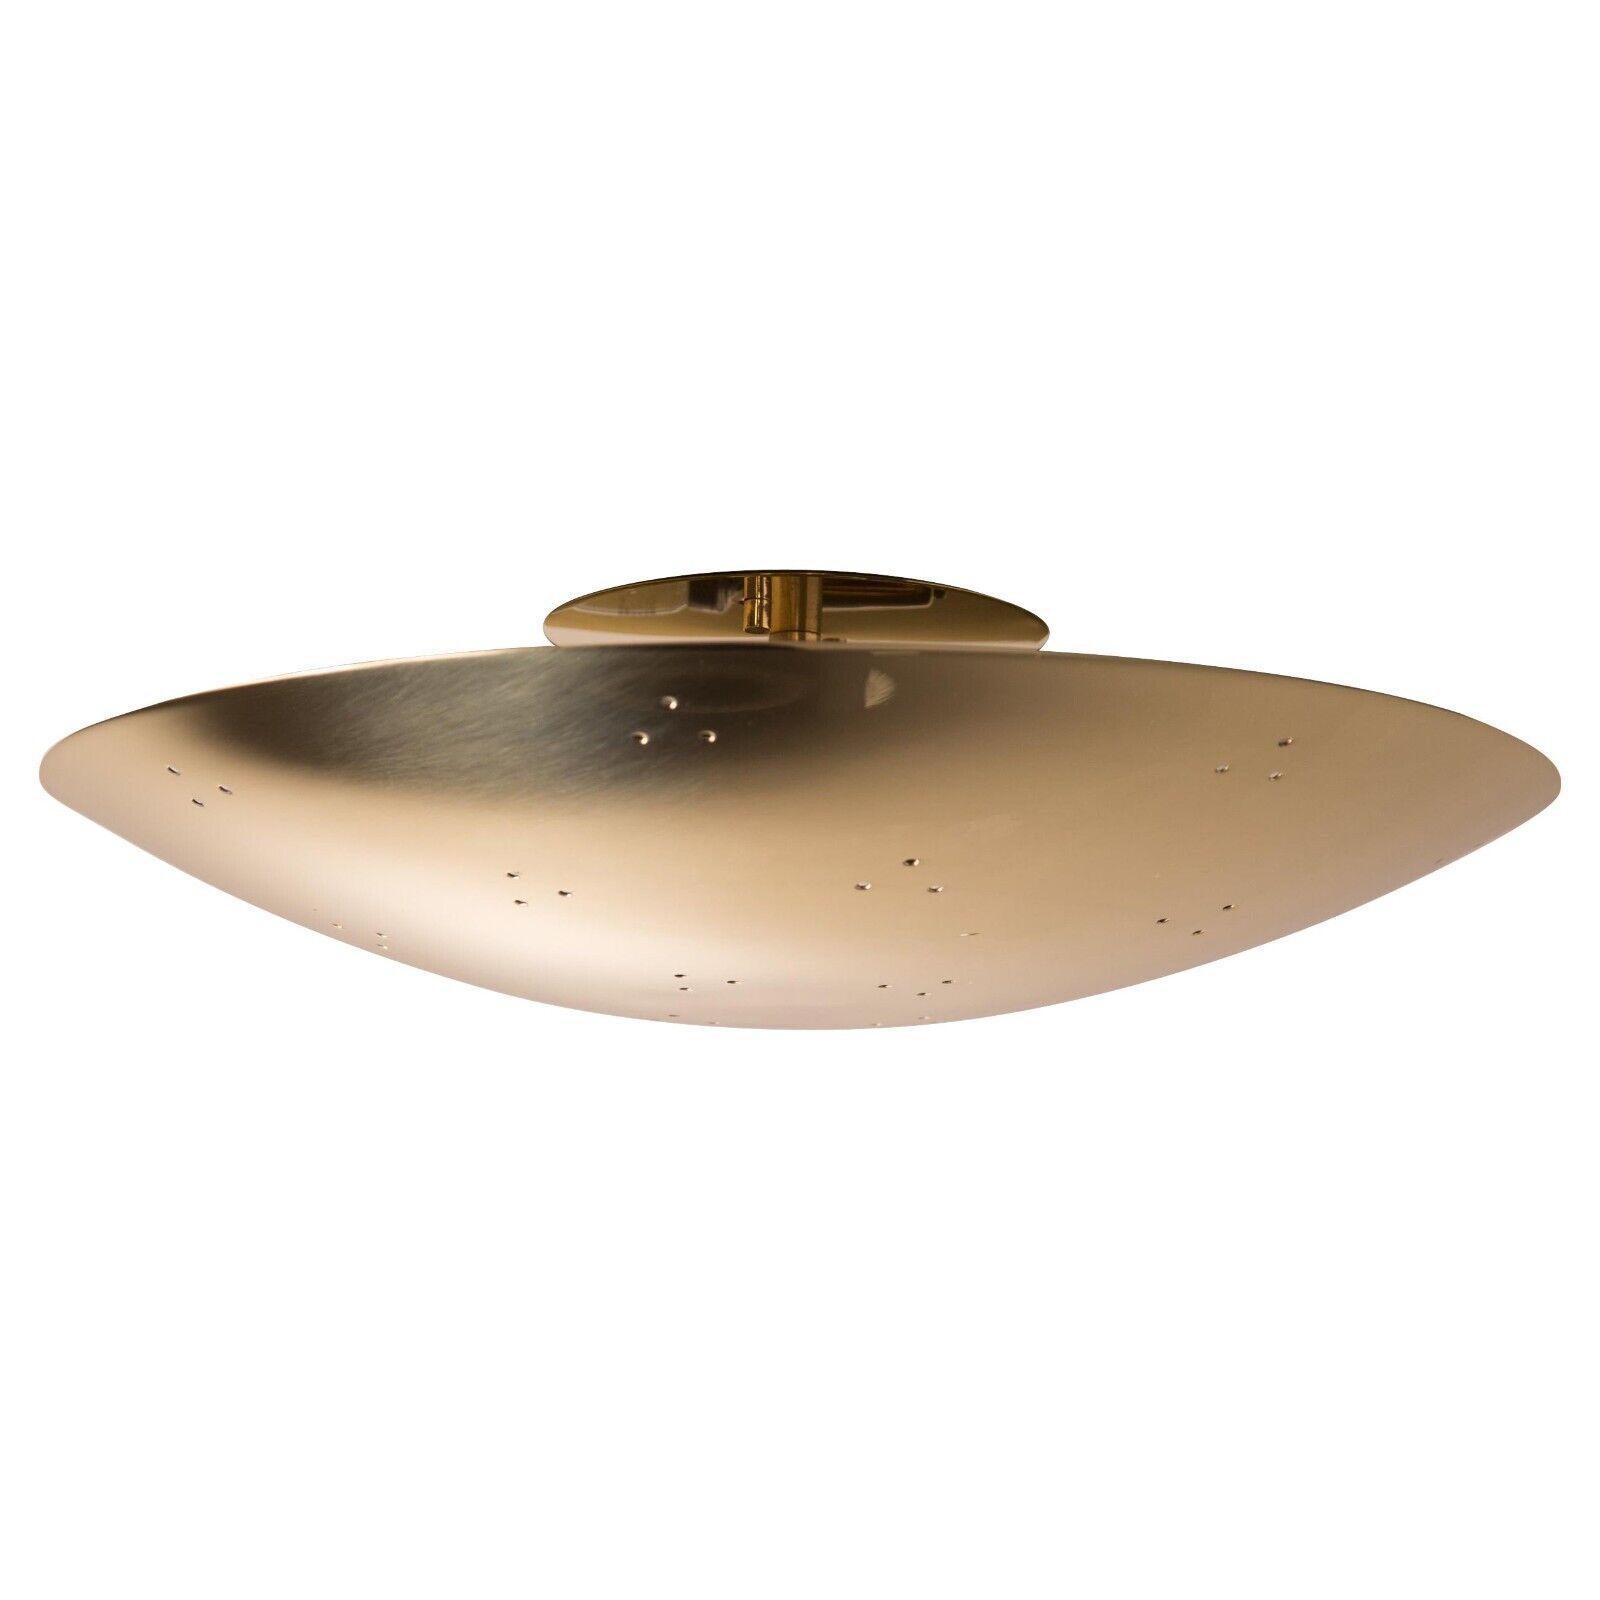 Two Enlighten 'Rey' Perforated Dome Ceiling Lamp in Polished Brass